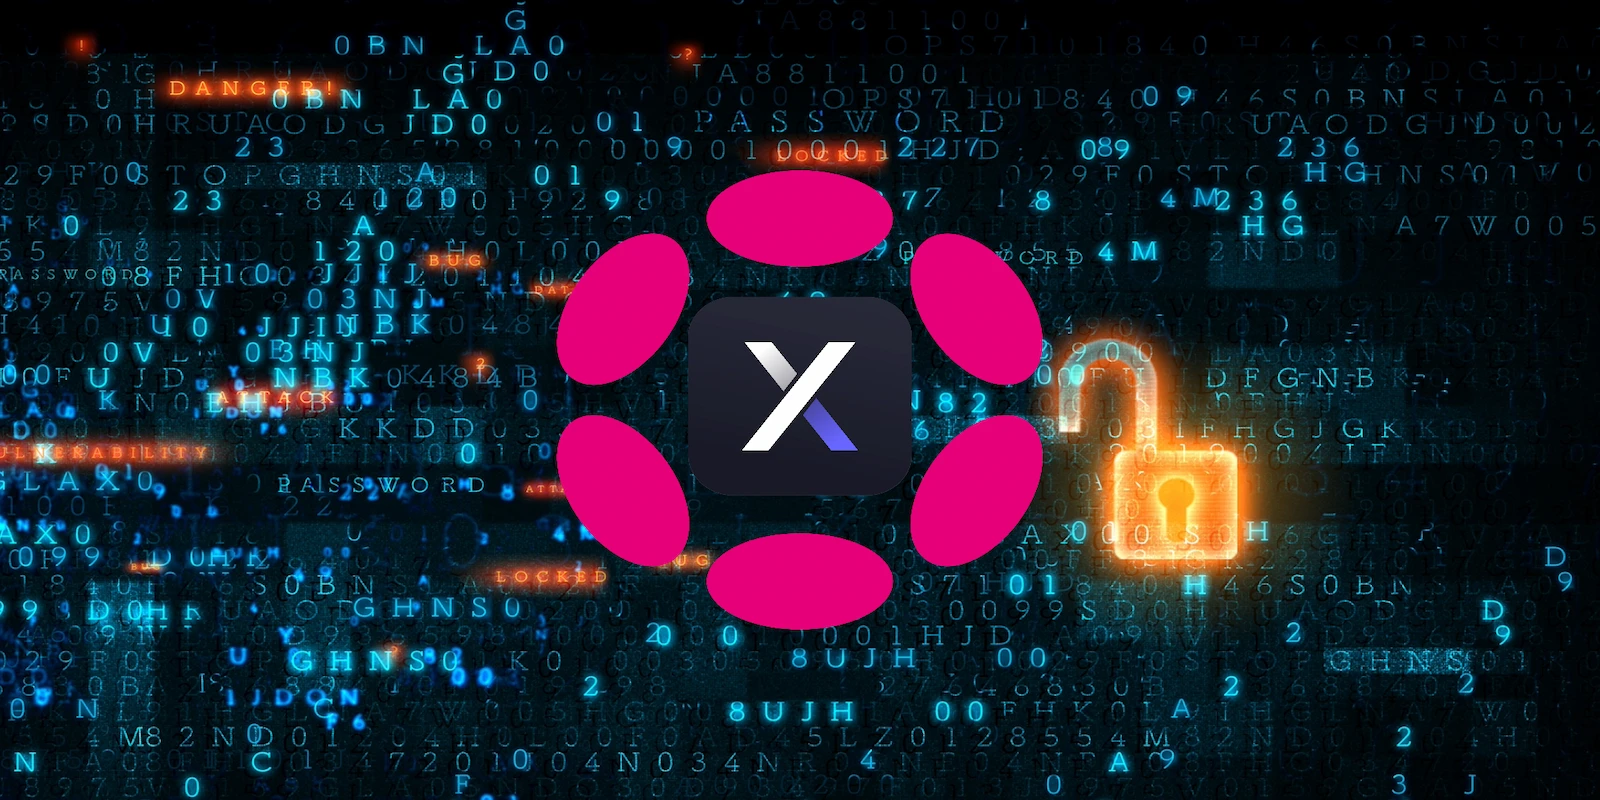 dYdX and Polkadot have token unlocks coming up, which could be bearish for the tokens.